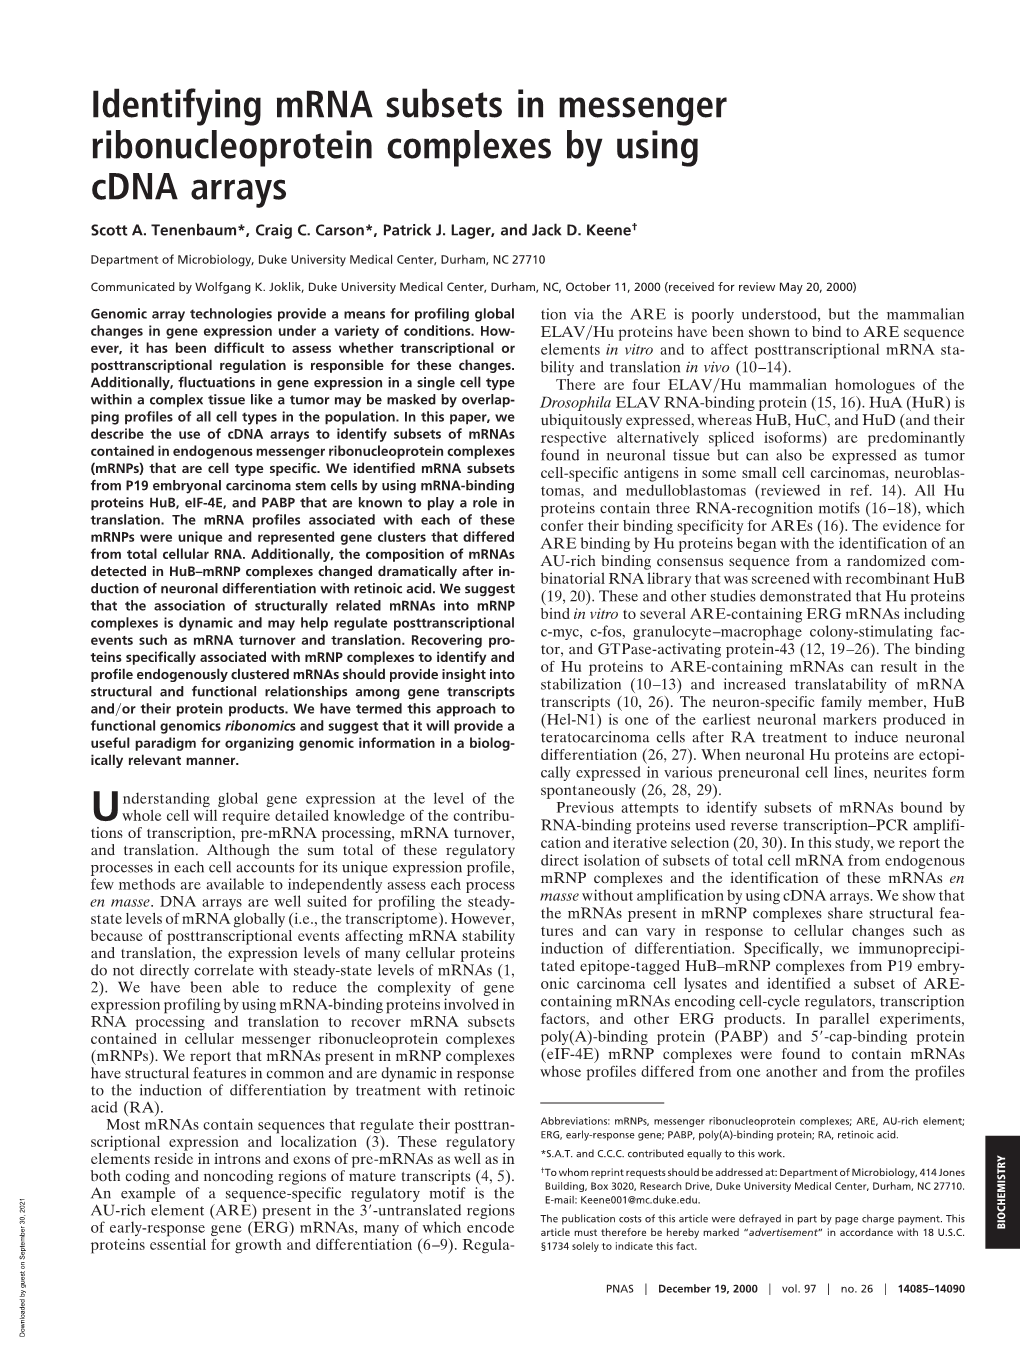 Identifying Mrna Subsets in Messenger Ribonucleoprotein Complexes by Using Cdna Arrays